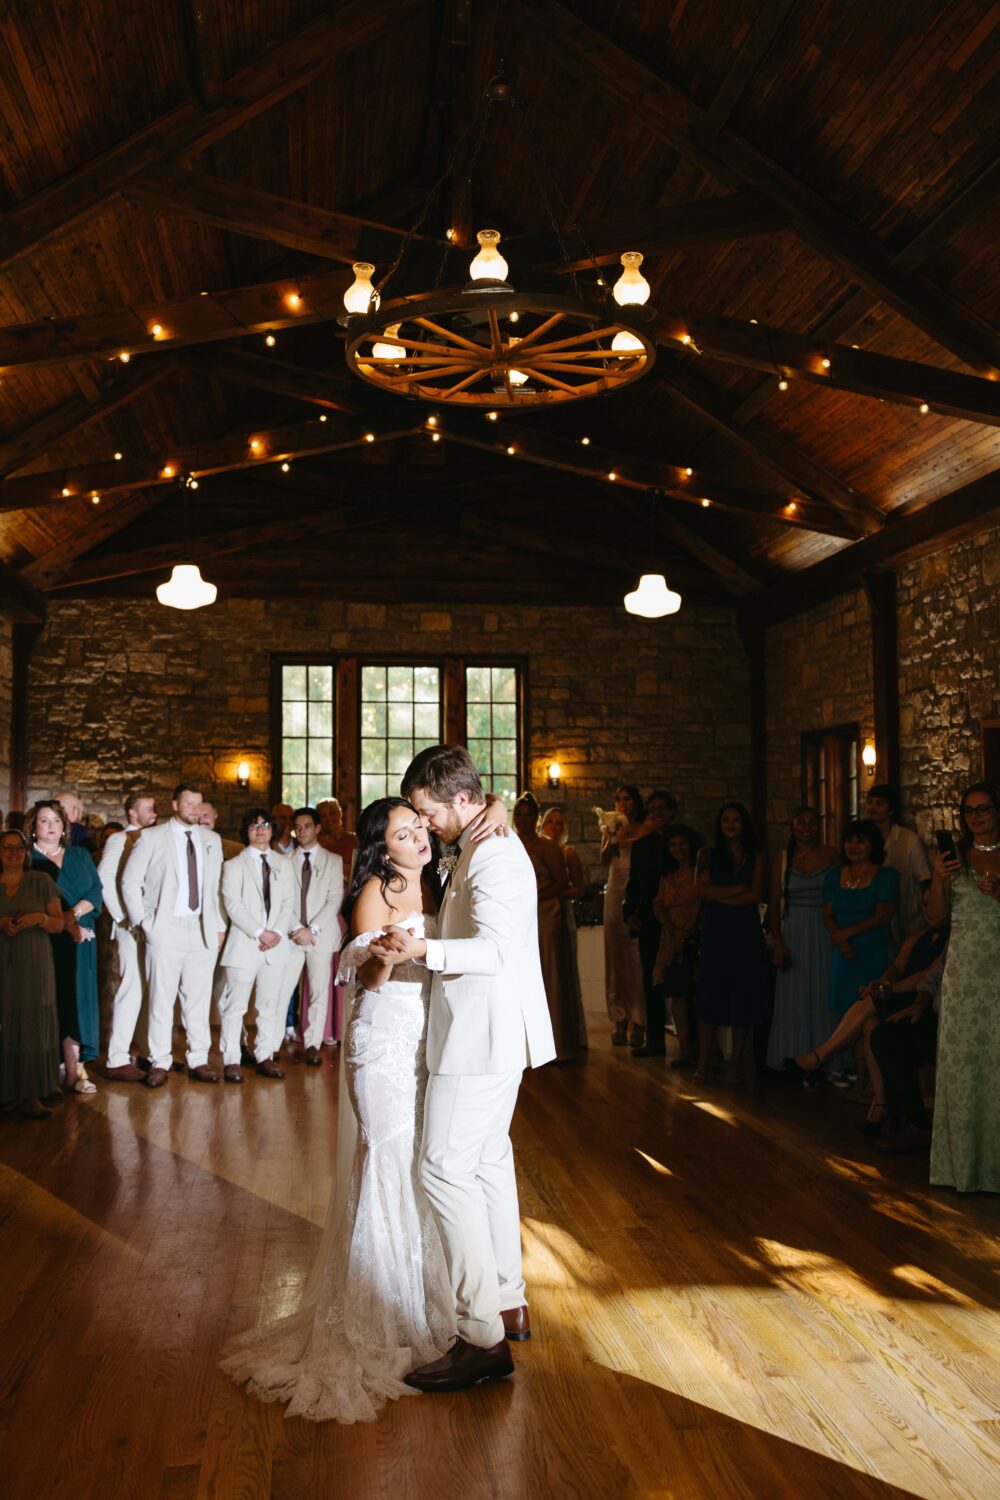 A wedding couple has a first dance inside Assembly Hall.